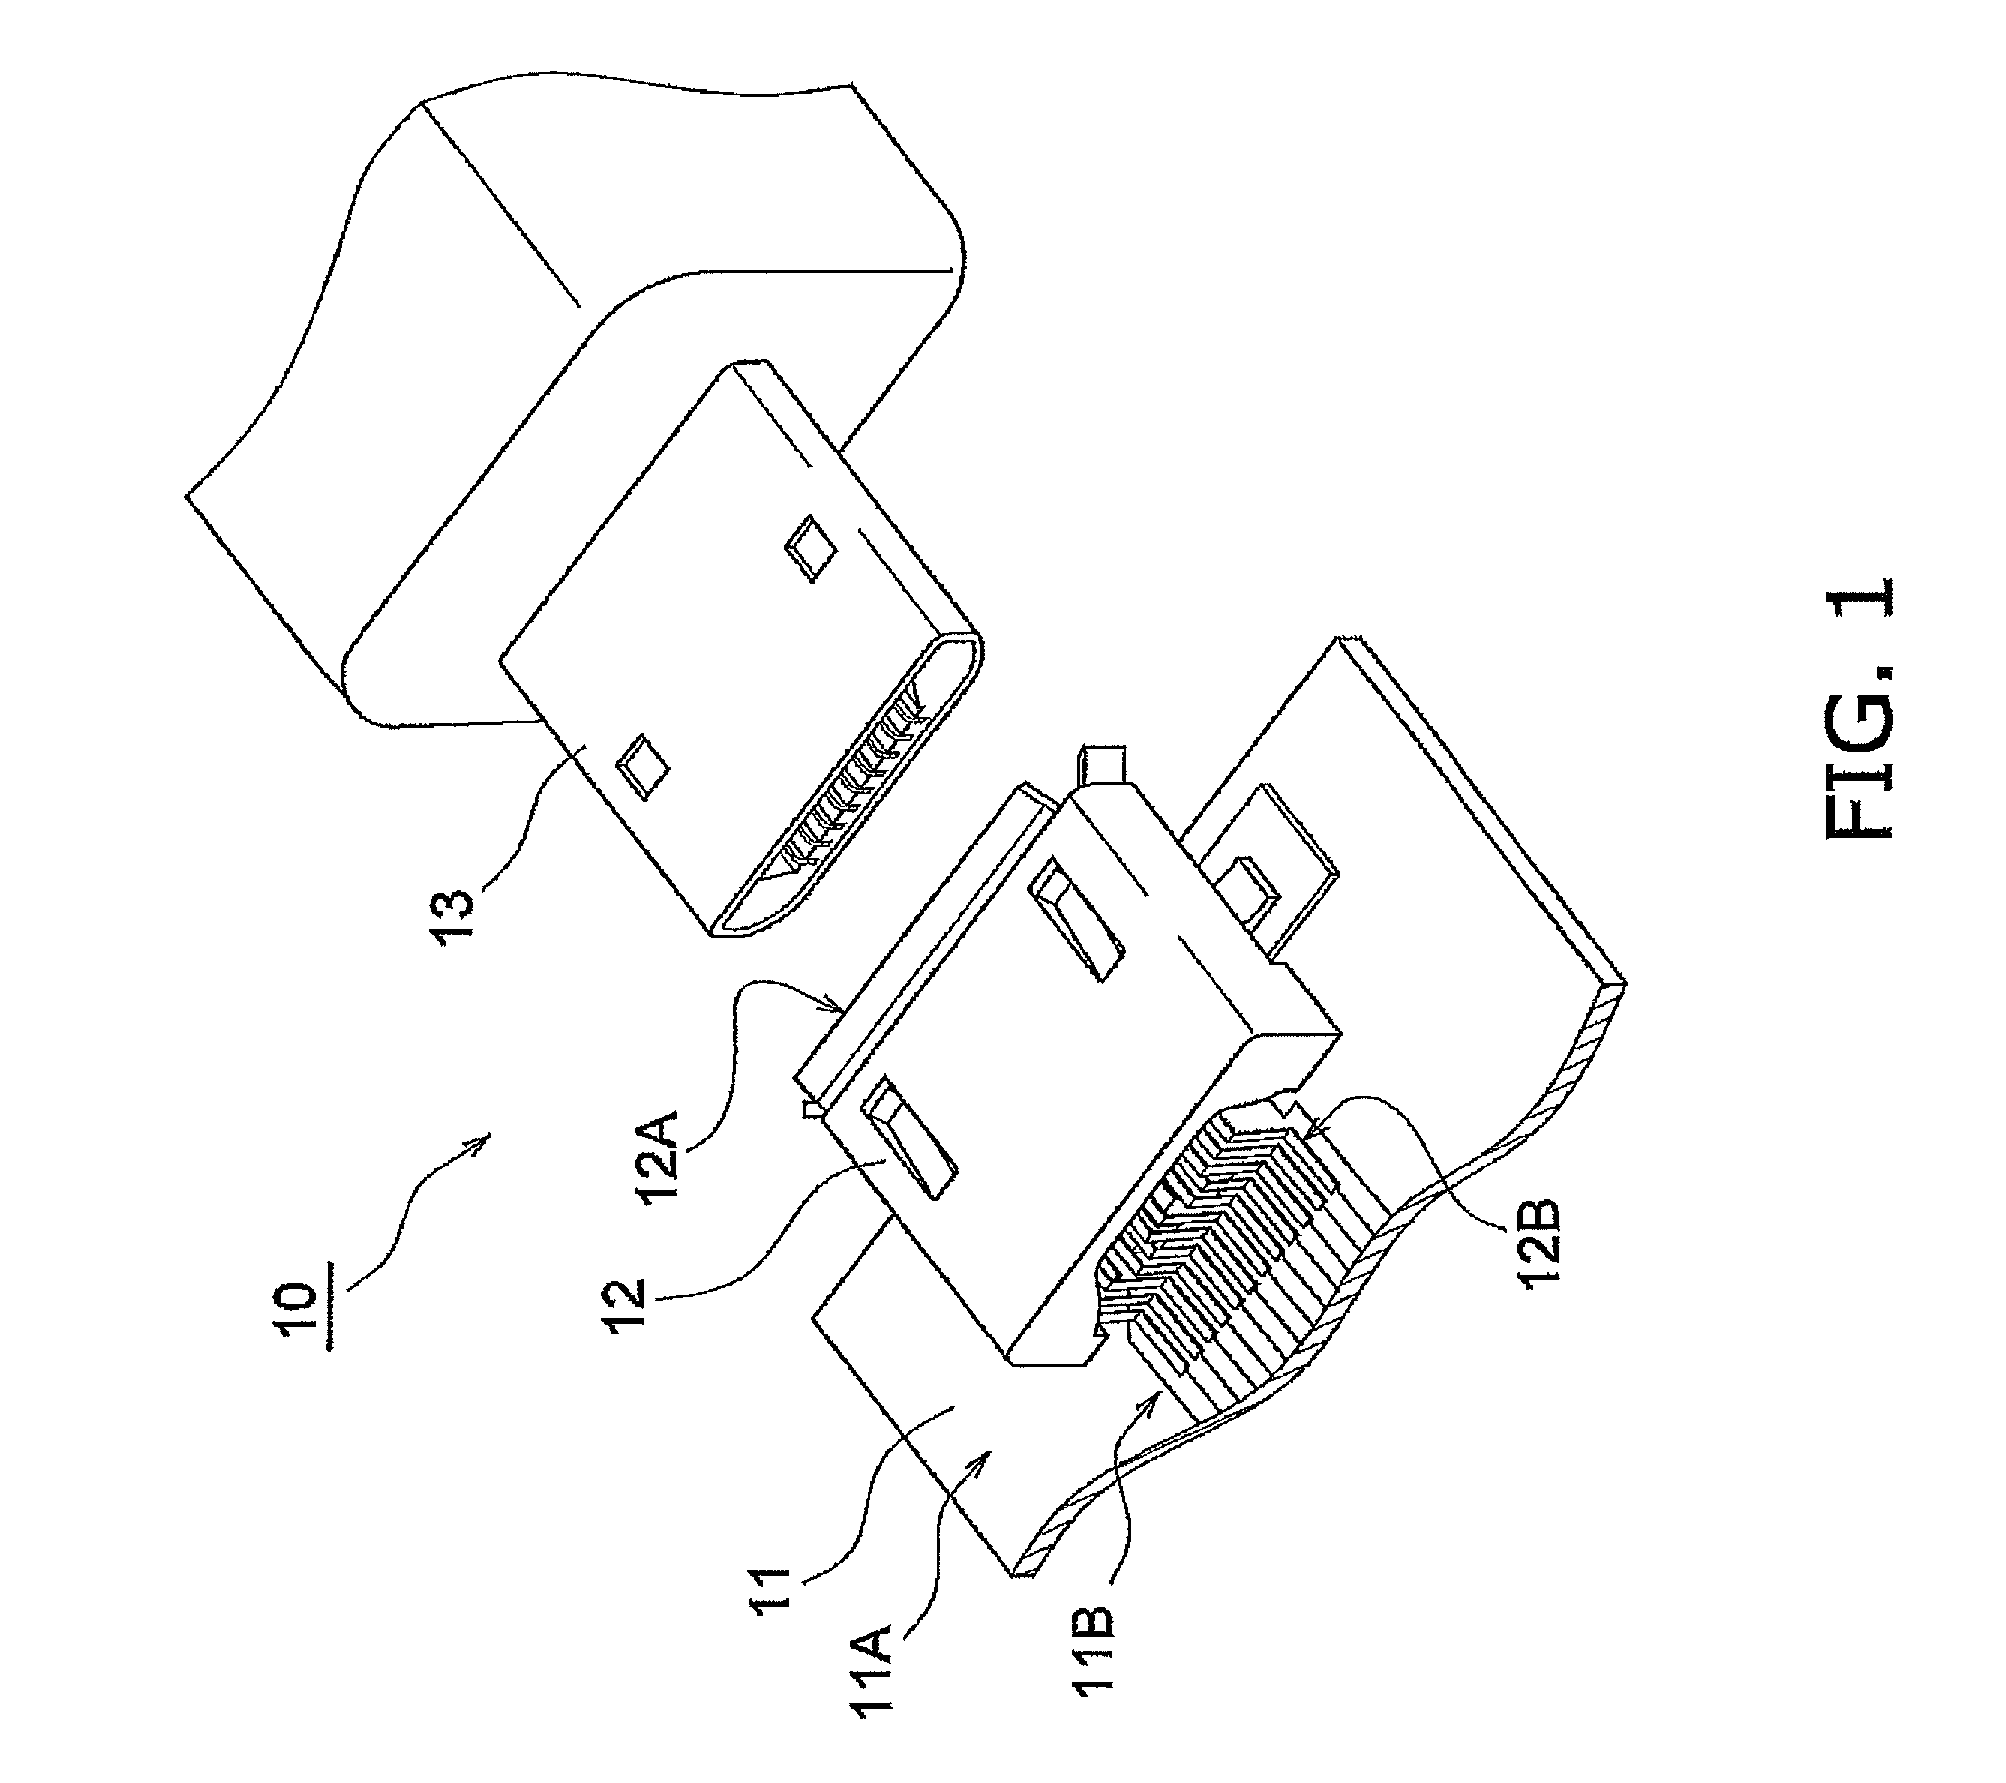 Connector assembly having signal and ground terminals